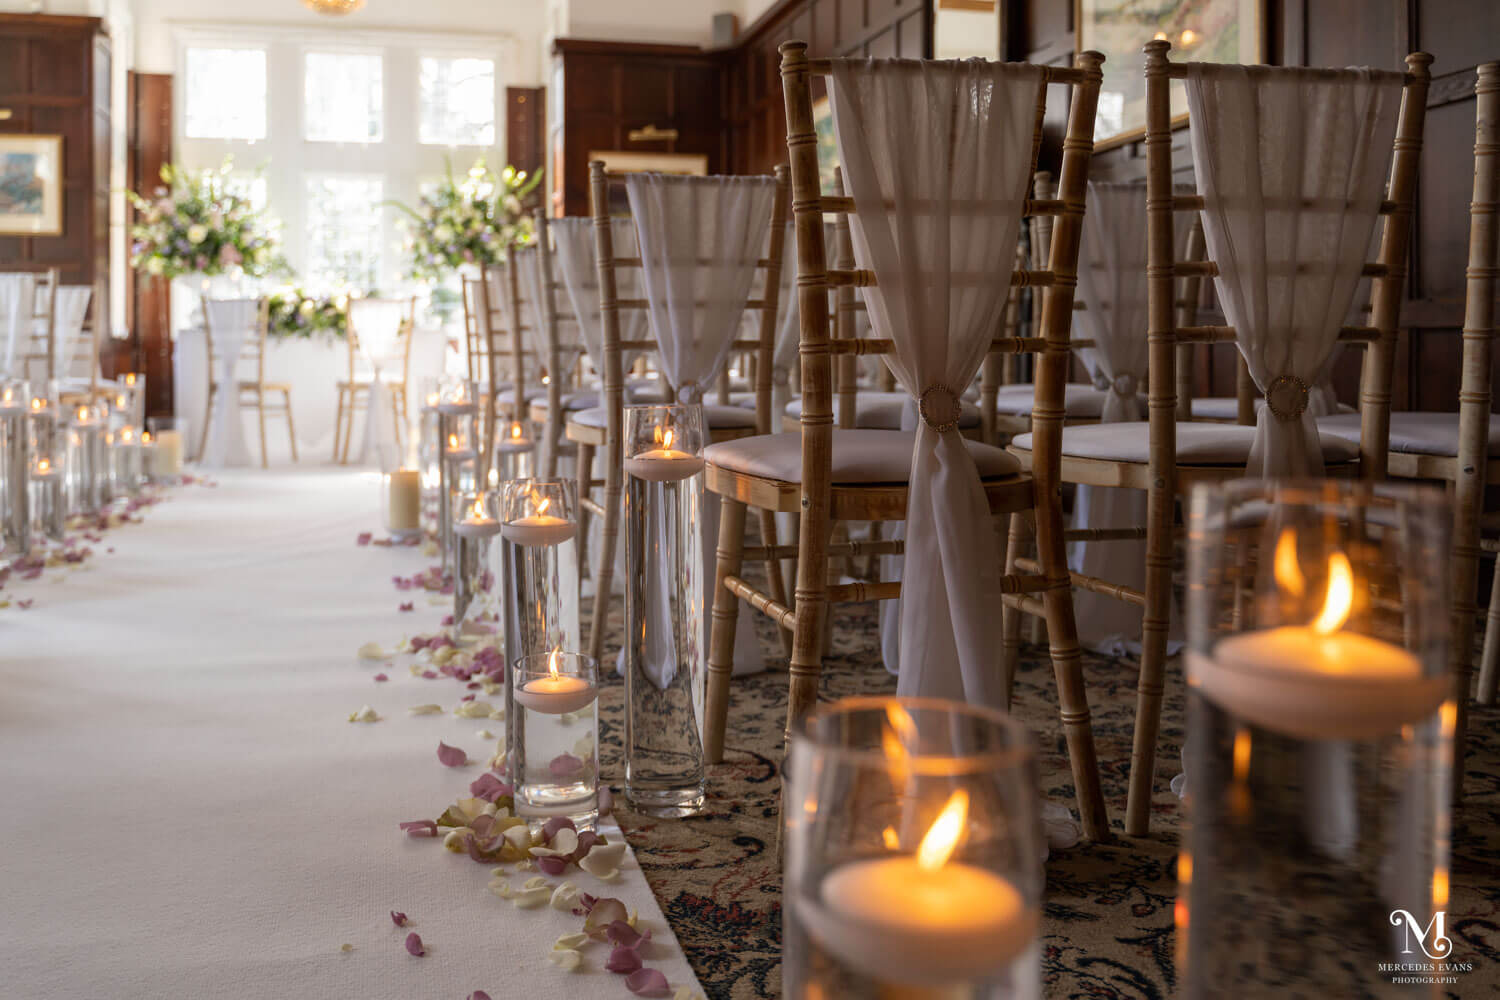 a view down the aisle of the chiavari chairs, vases with floating candles and lilac and white petals